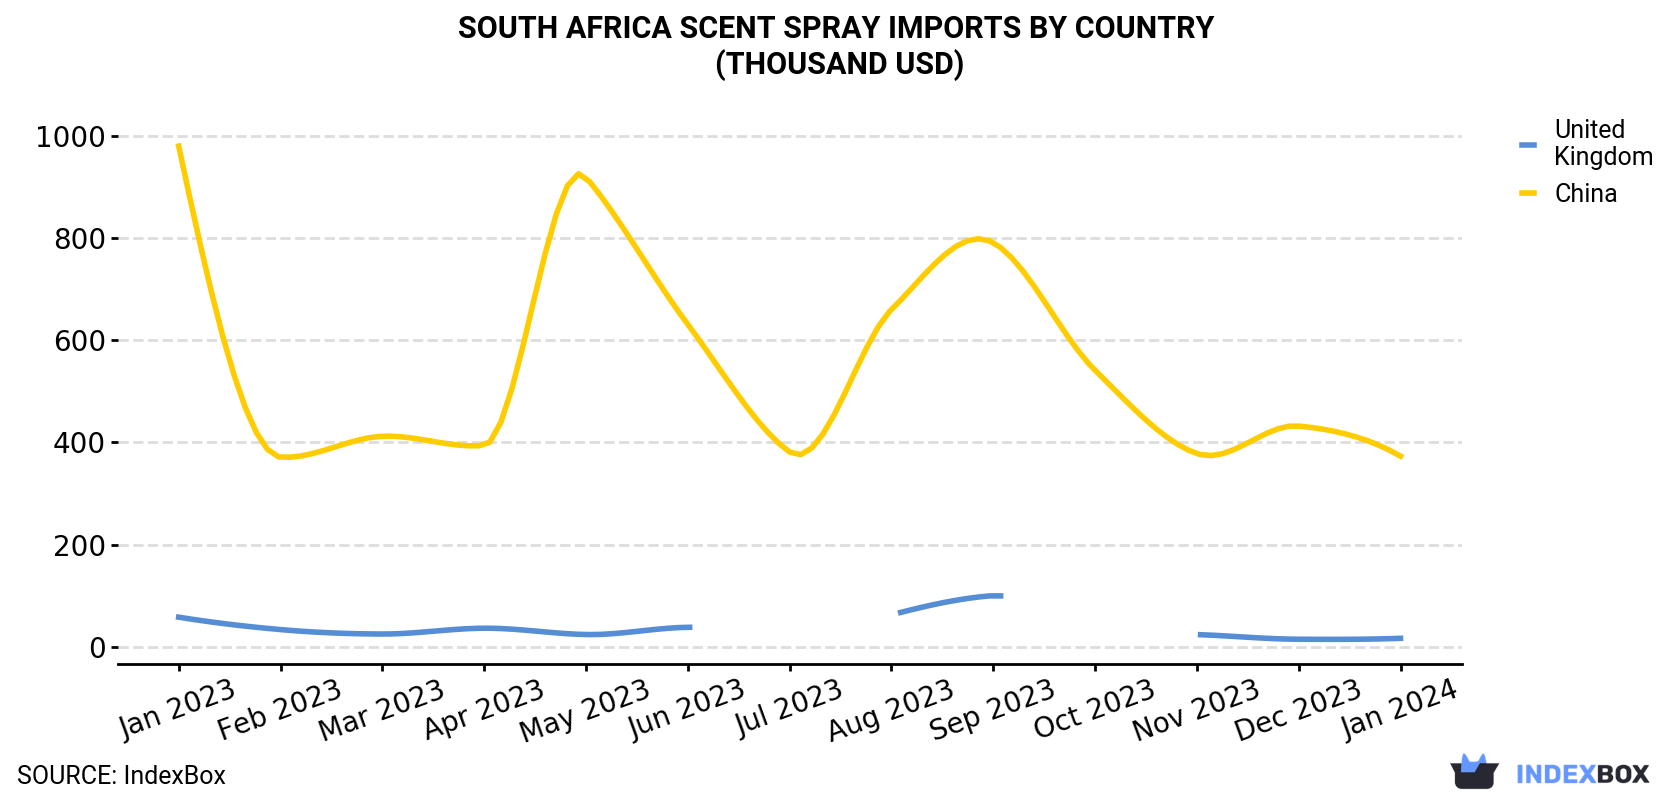 South Africa Scent Spray Imports By Country (Thousand USD)